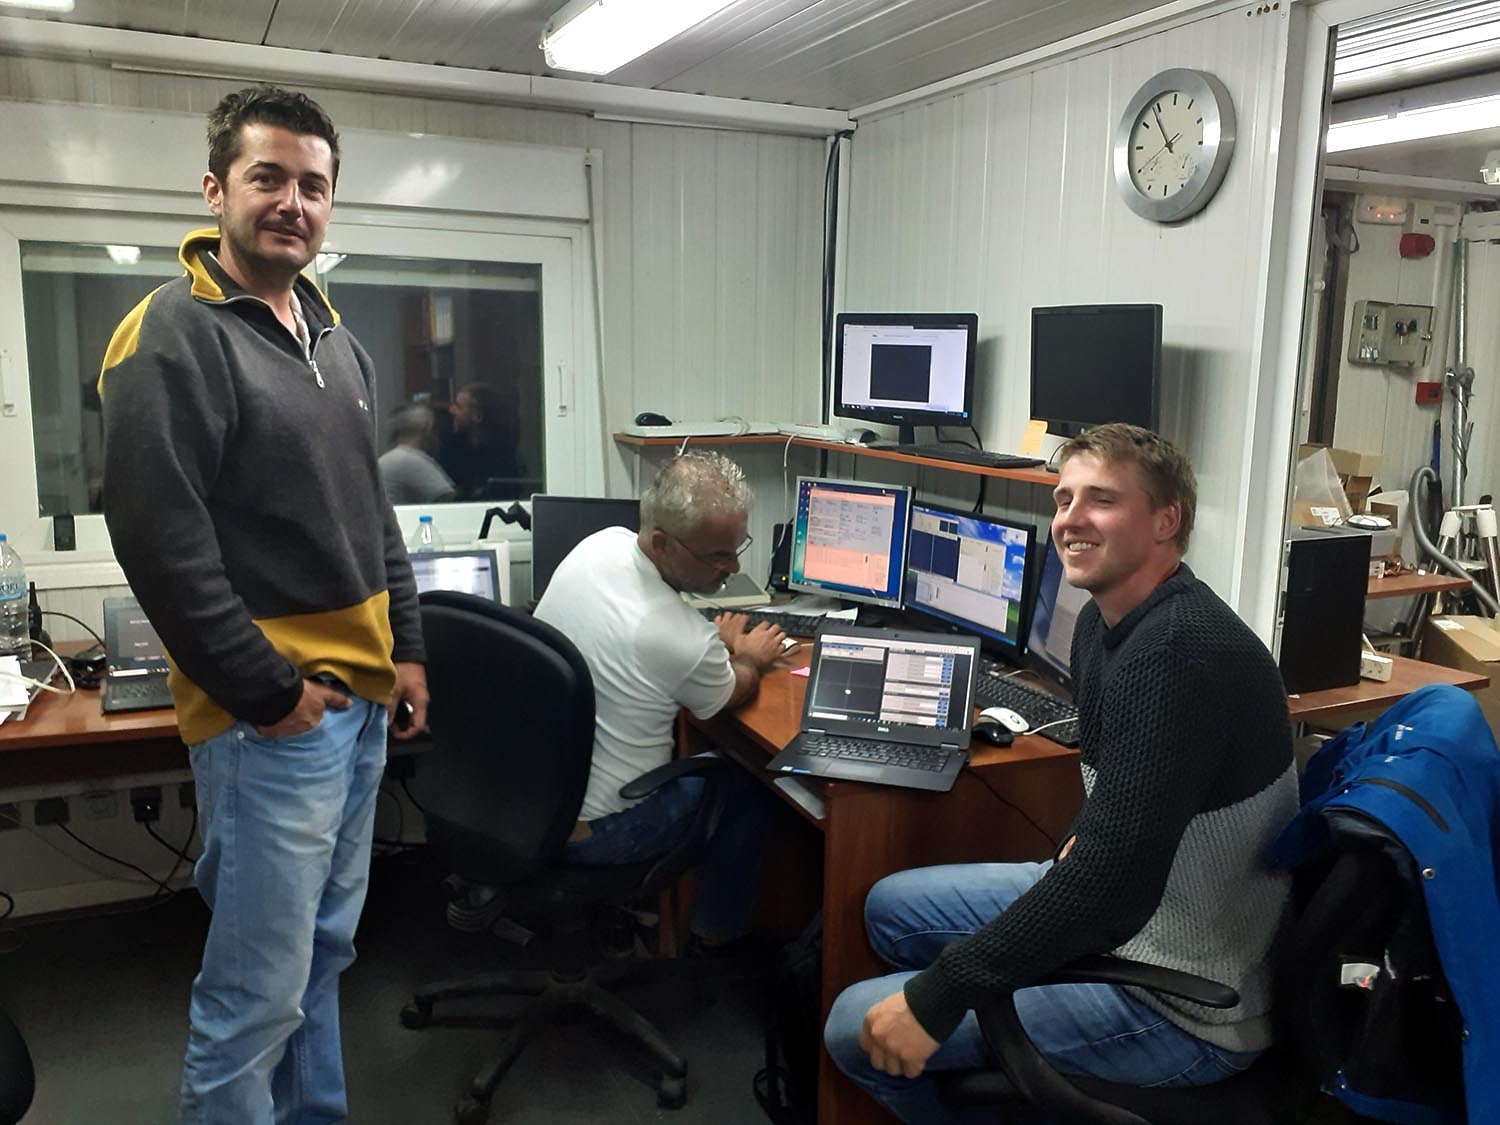 Members of the ScyLight team (Alexis Gourzelas, Ioannis Alikakos and Donatas Miklusis) with the first light image displayed on the screen of the laptop: a star very near the center of the image.